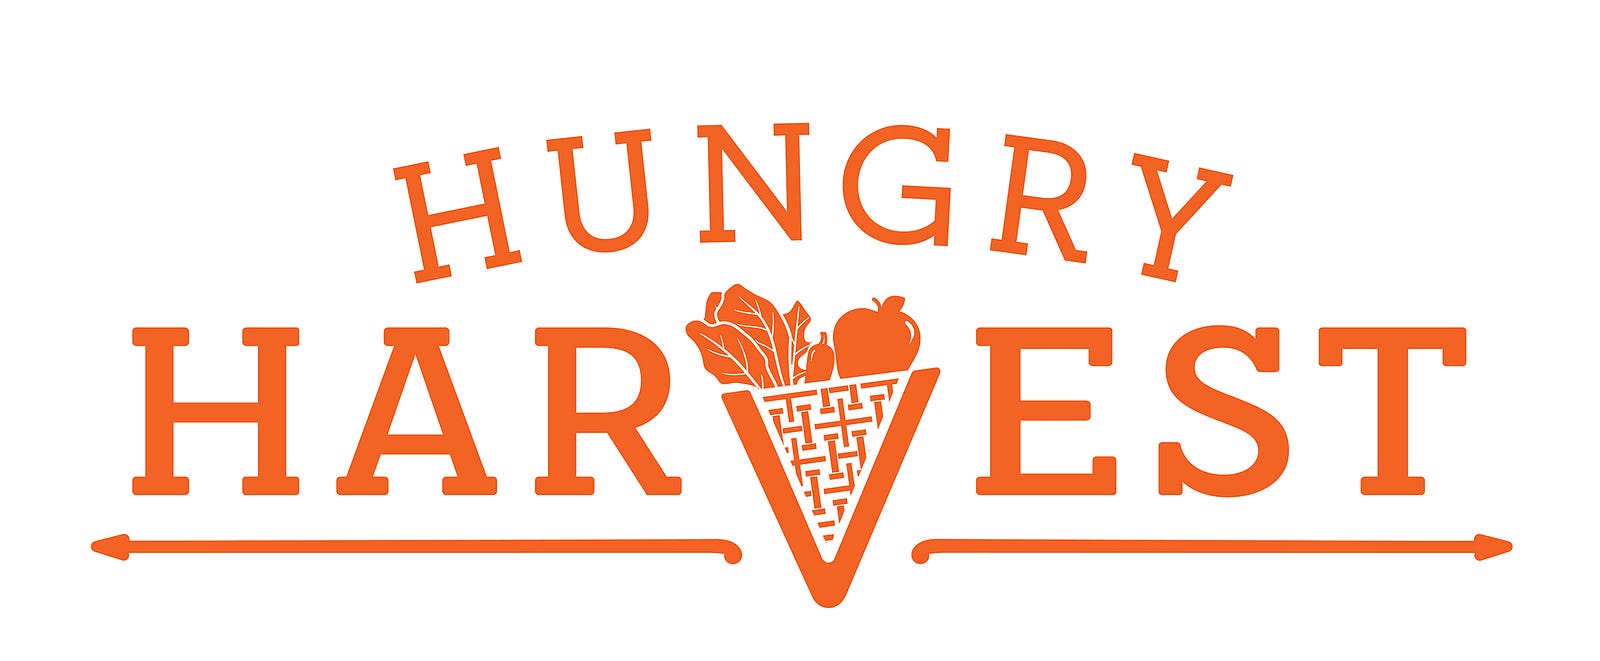 Image result for hungry harvest